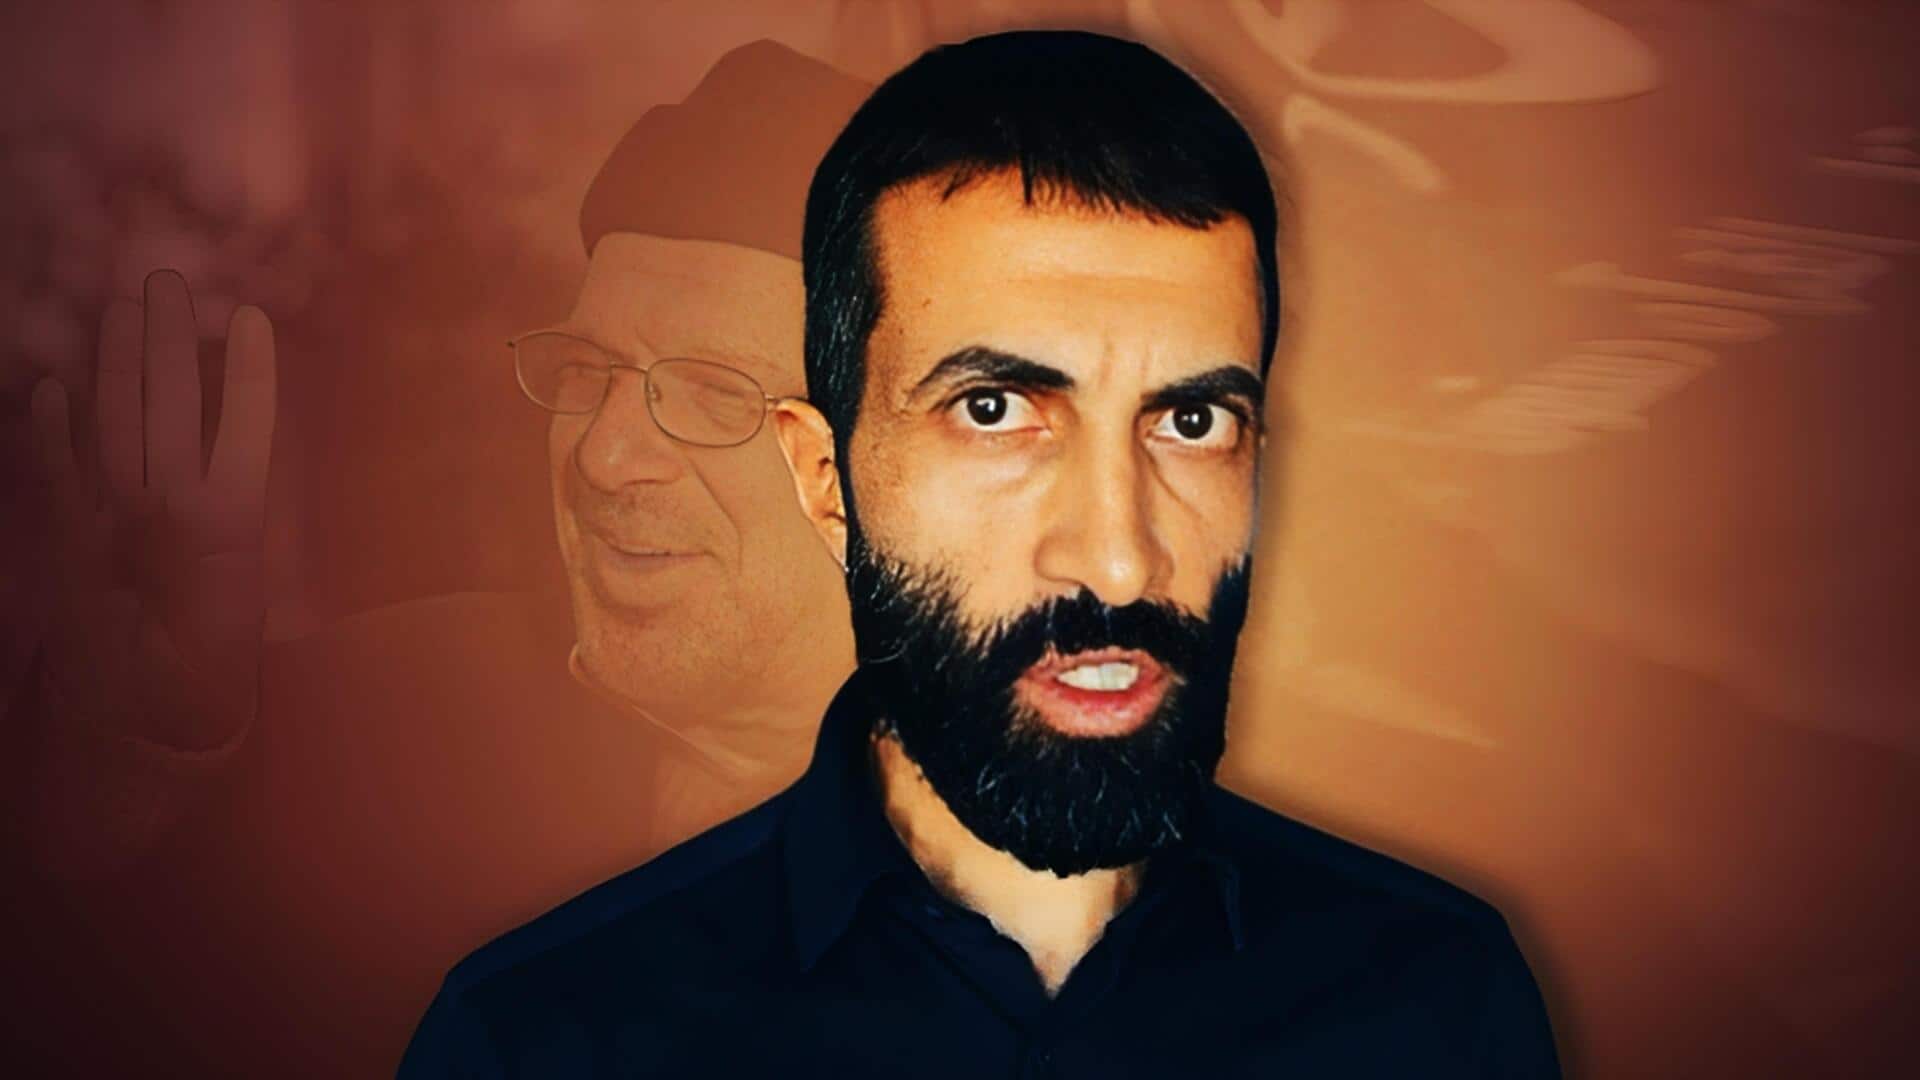 Execute top leaders, including my father: Son of Hamas co-founder